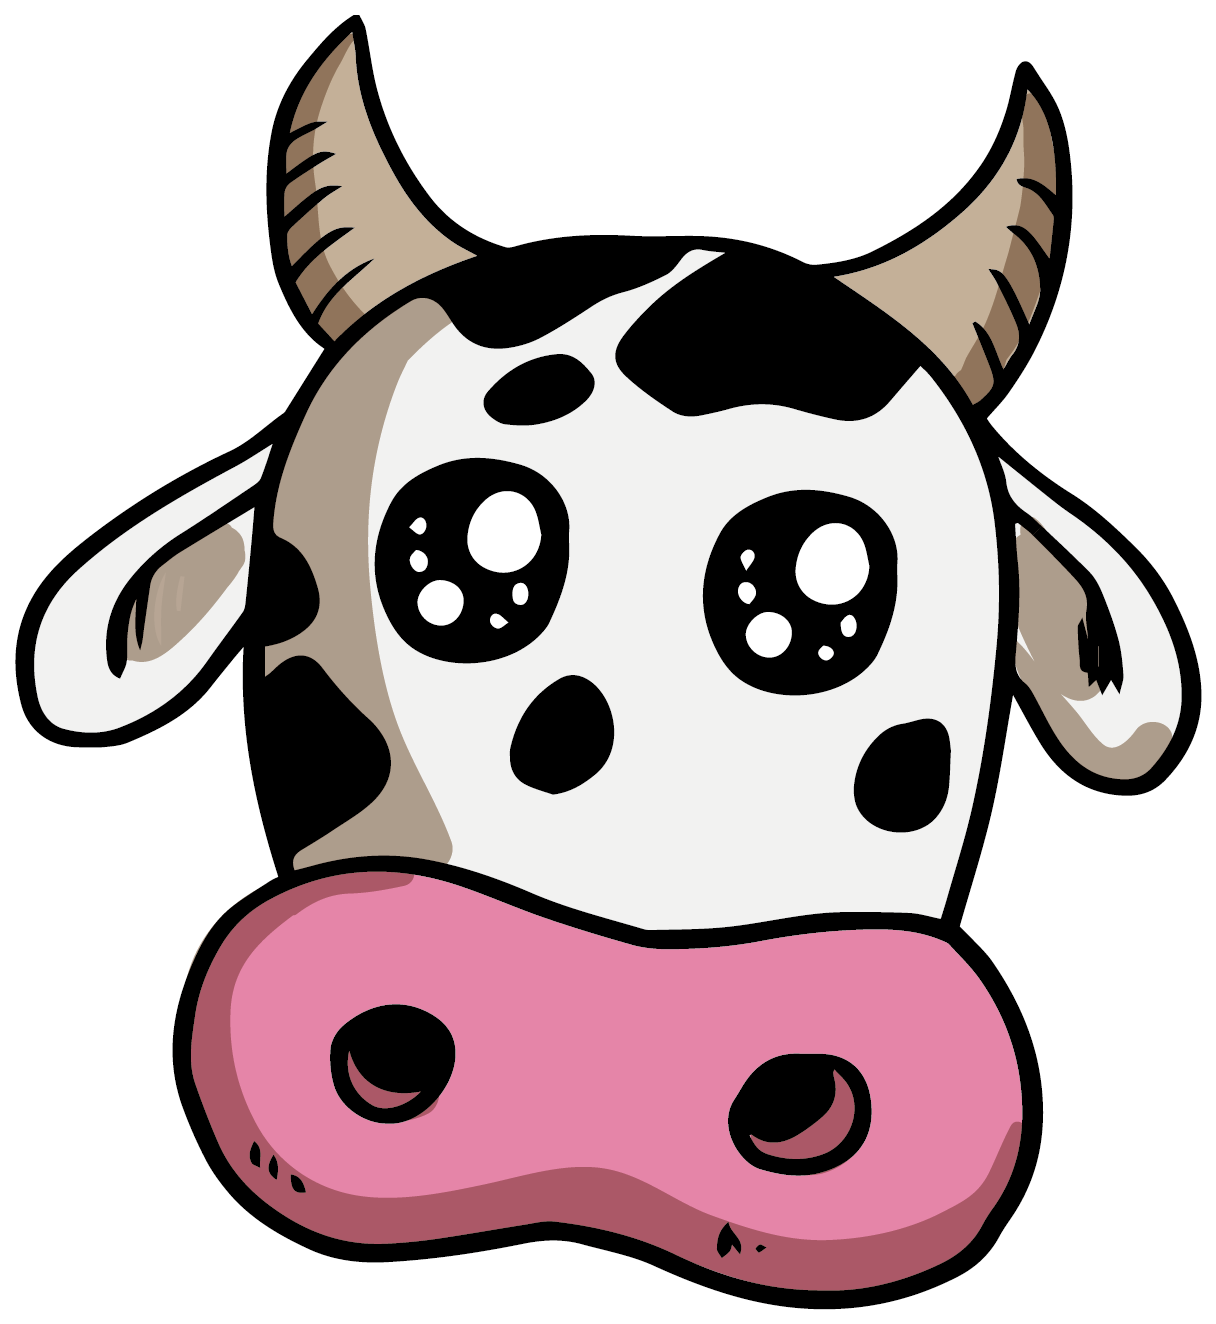 Googly Eye Cow Stock Vector Art More Images Of Animal - Googly Eye Cow Stock Vector Art More Images Of Animal (2126x2126)